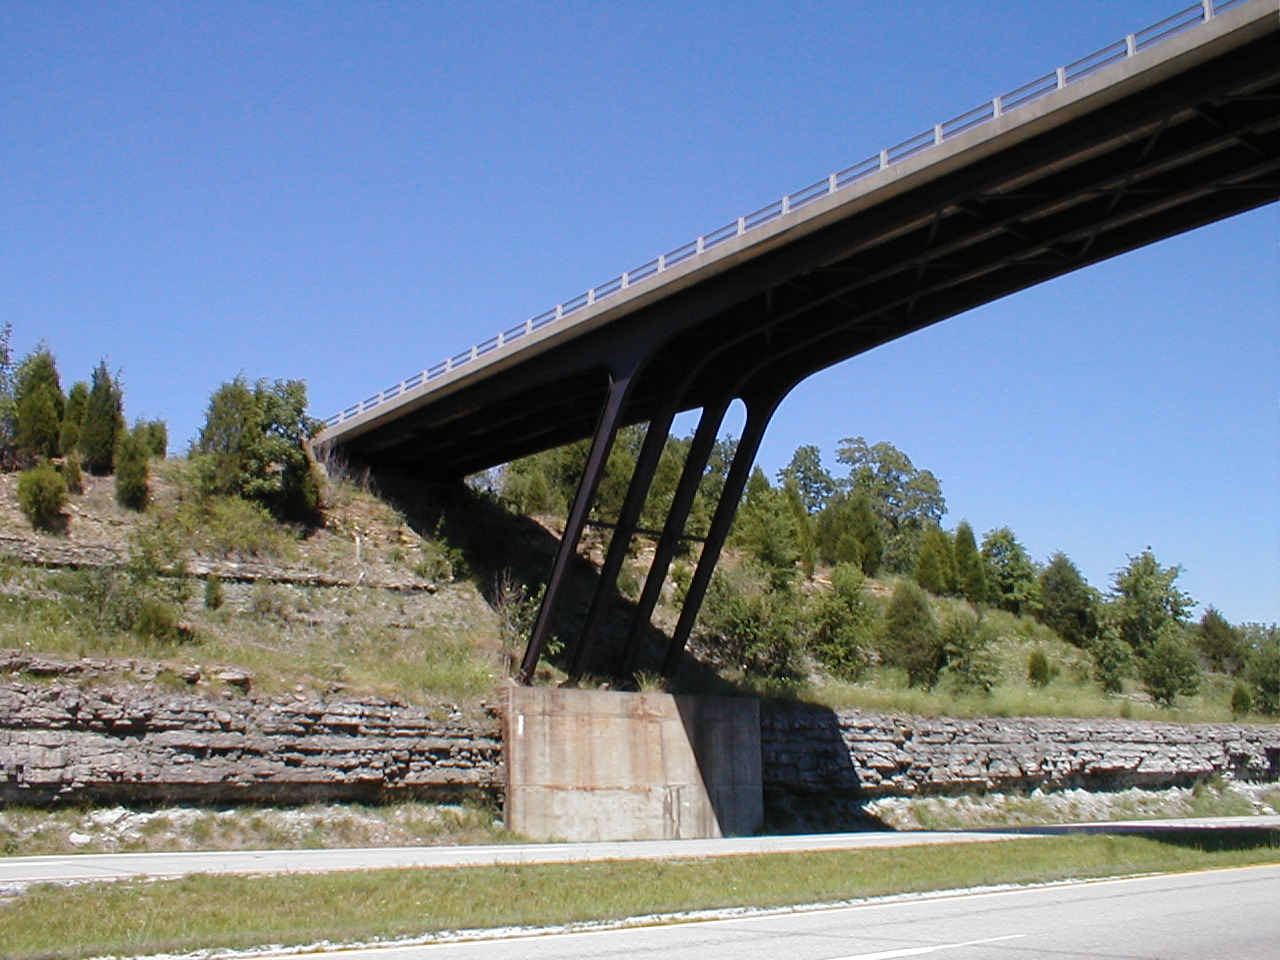 A view of the underside and supports of the bridge.